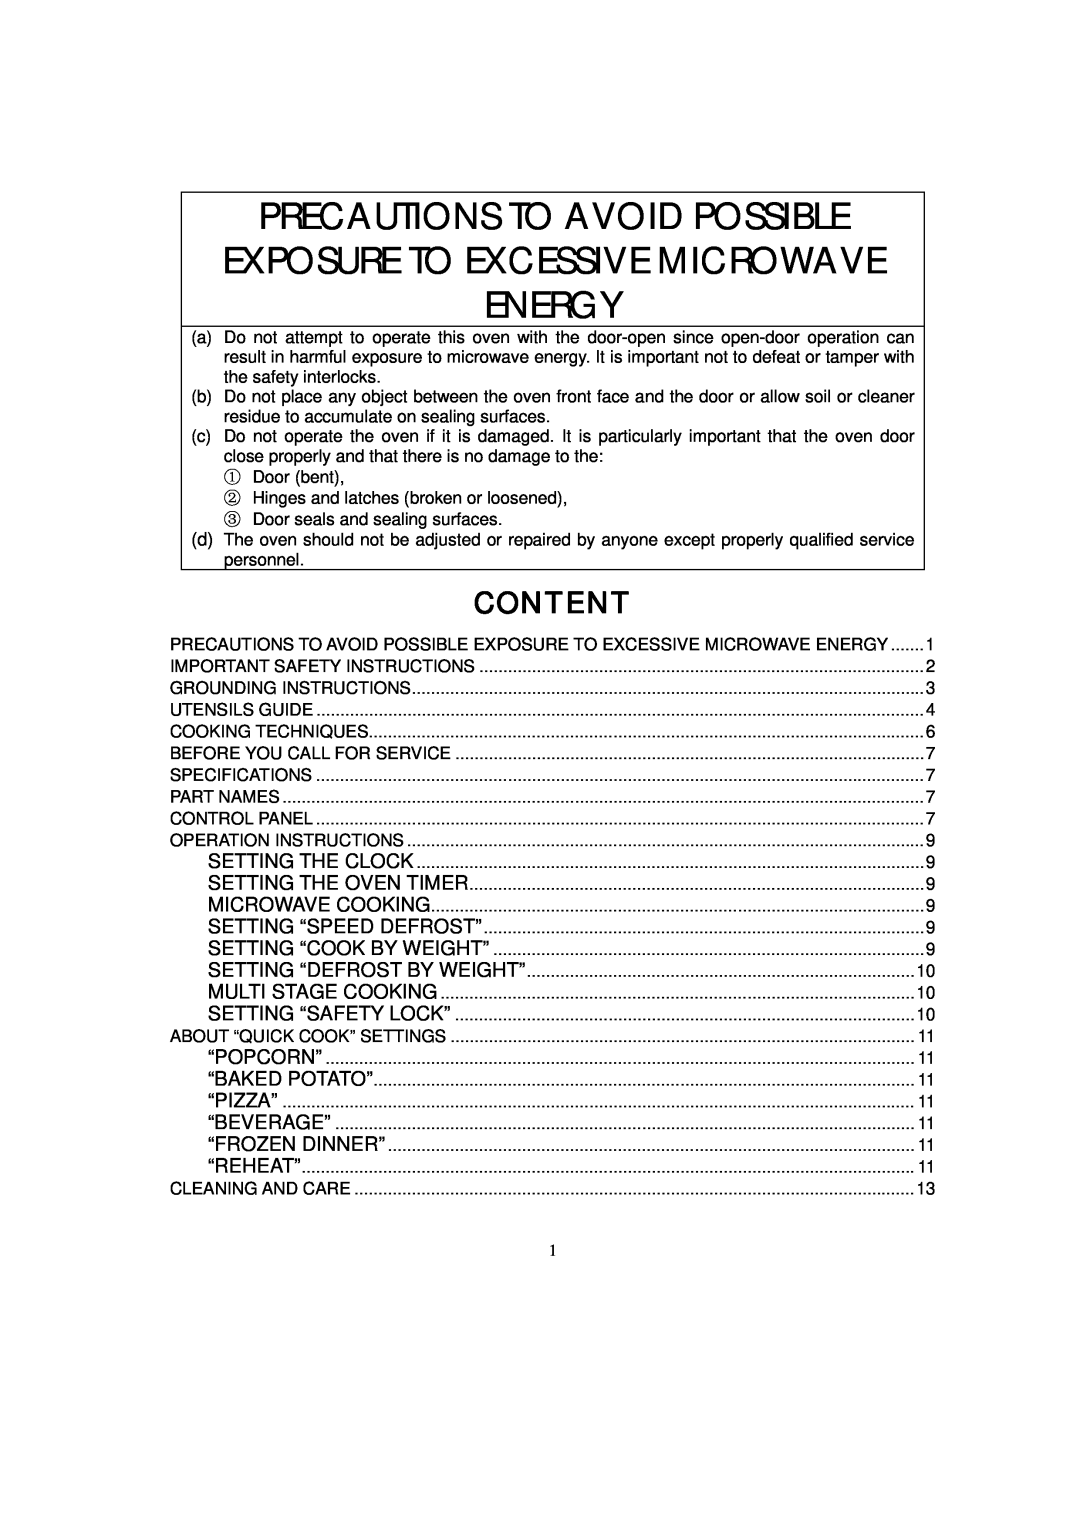 RCA RMW953 warranty Precautions To Avoid Possible, Exposure To Excessive Microwave Energy, Content 